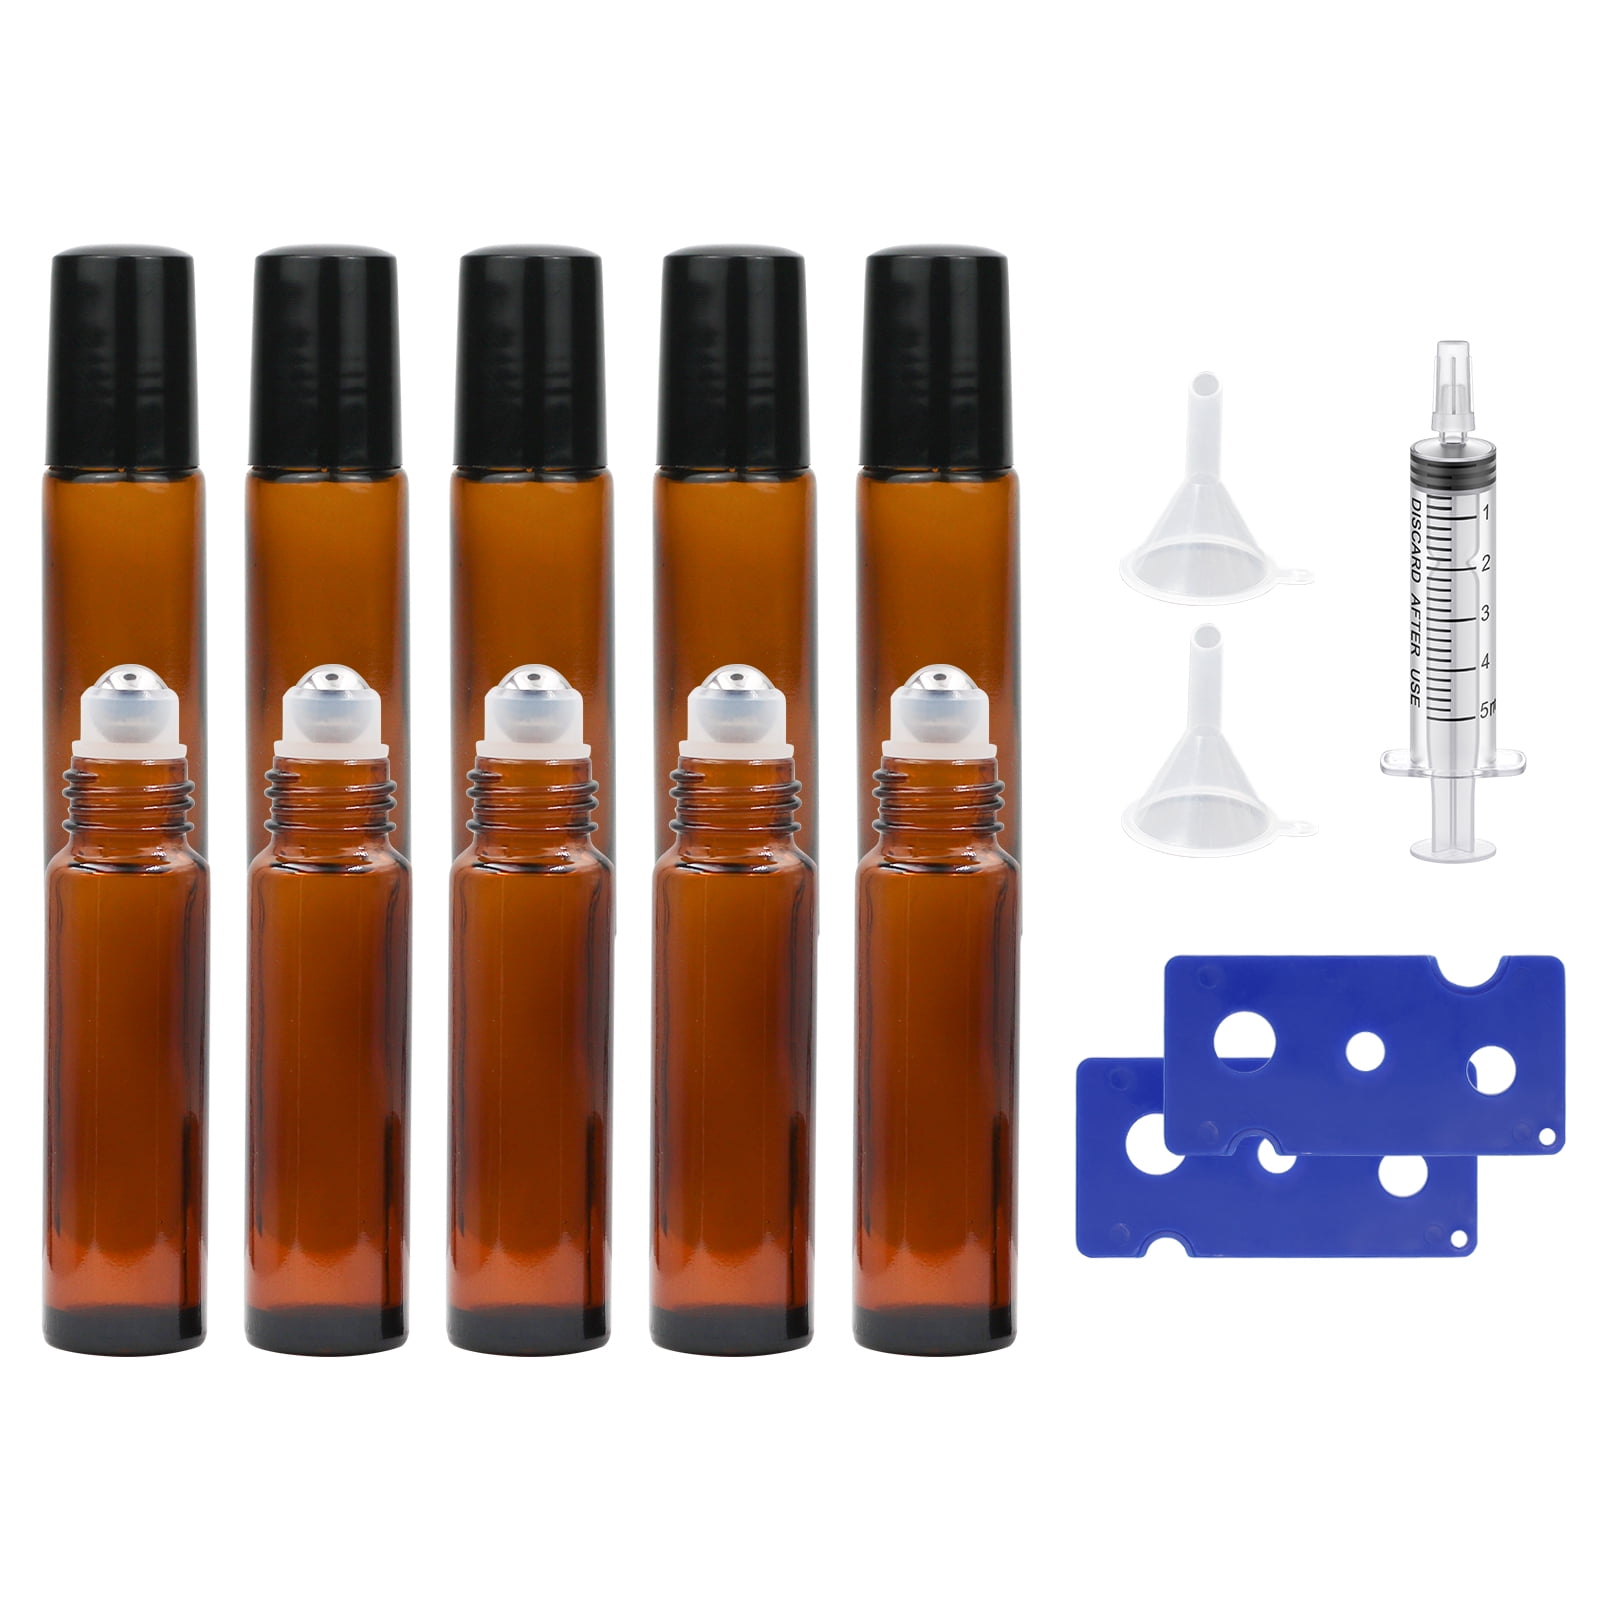 15 Pack of 4oz Amber Glass Bottles with Dropper Dispenser and 6 Funnels for  Essential Oils, Travel, Perfumes, Liquids, Hair and Body Oils (21 Total  Pieces, 120ml)